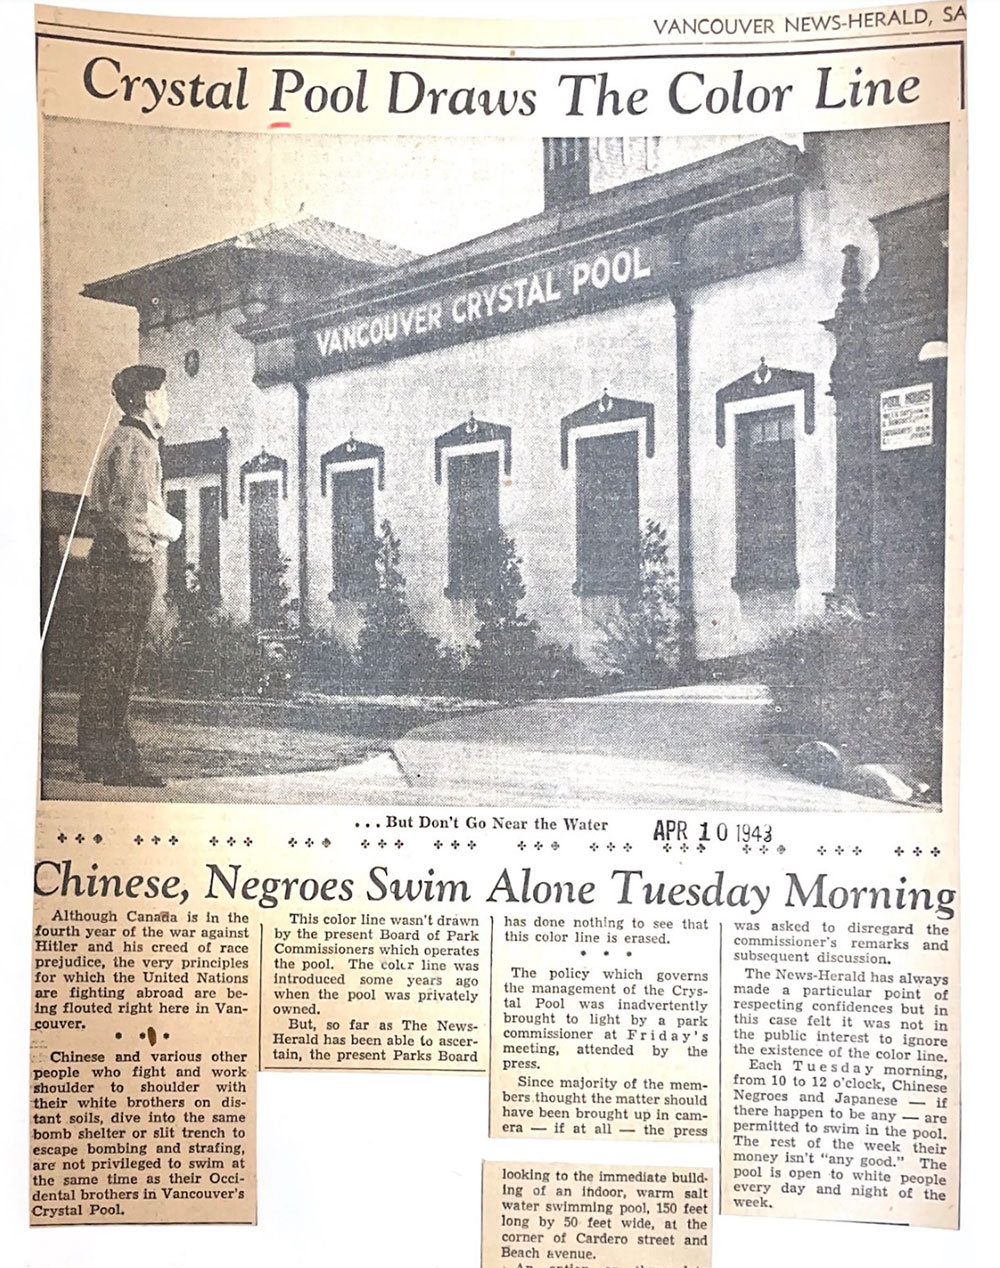 An archival newspaper clipping features a black and white photo of a young Chinese Canadian man standing in front of a building with a sign that reads 'Vancouver Crystal Pool.'